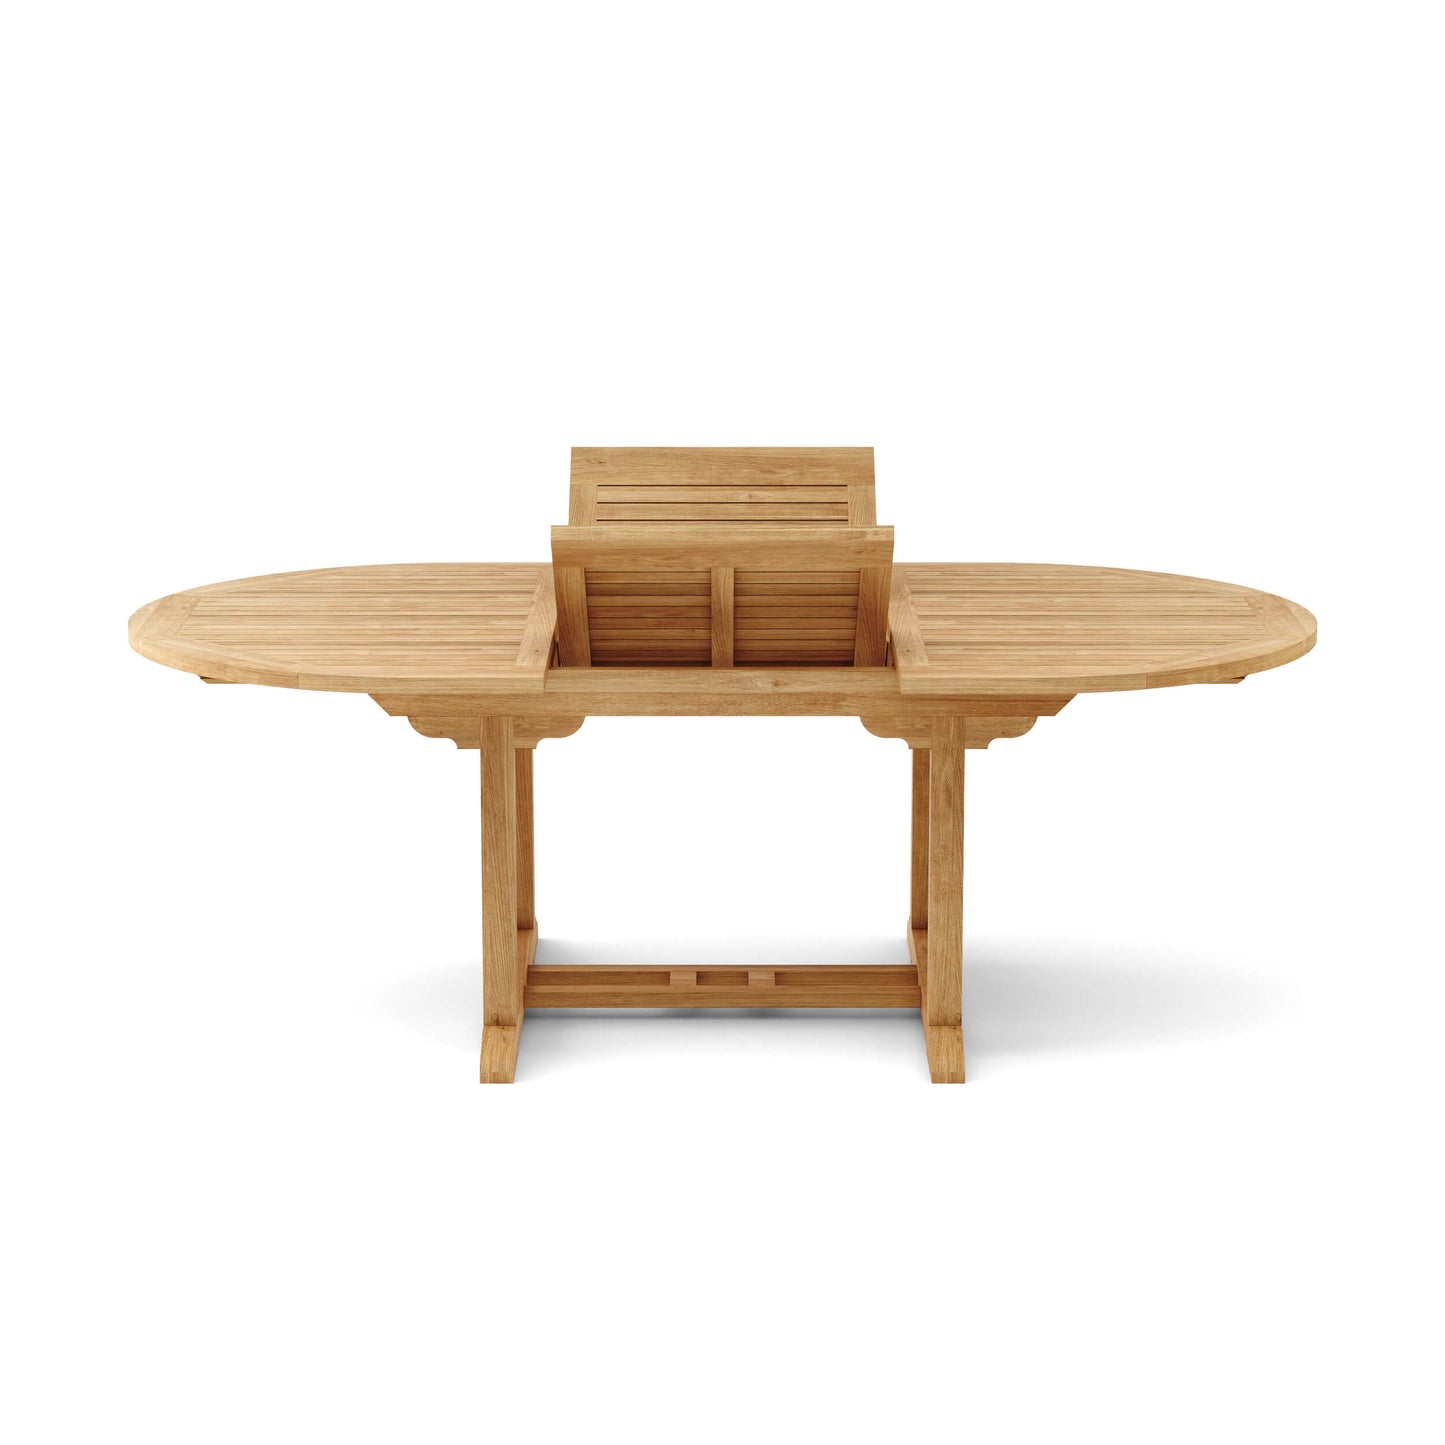 Bahama 87" Oval Extension Tables